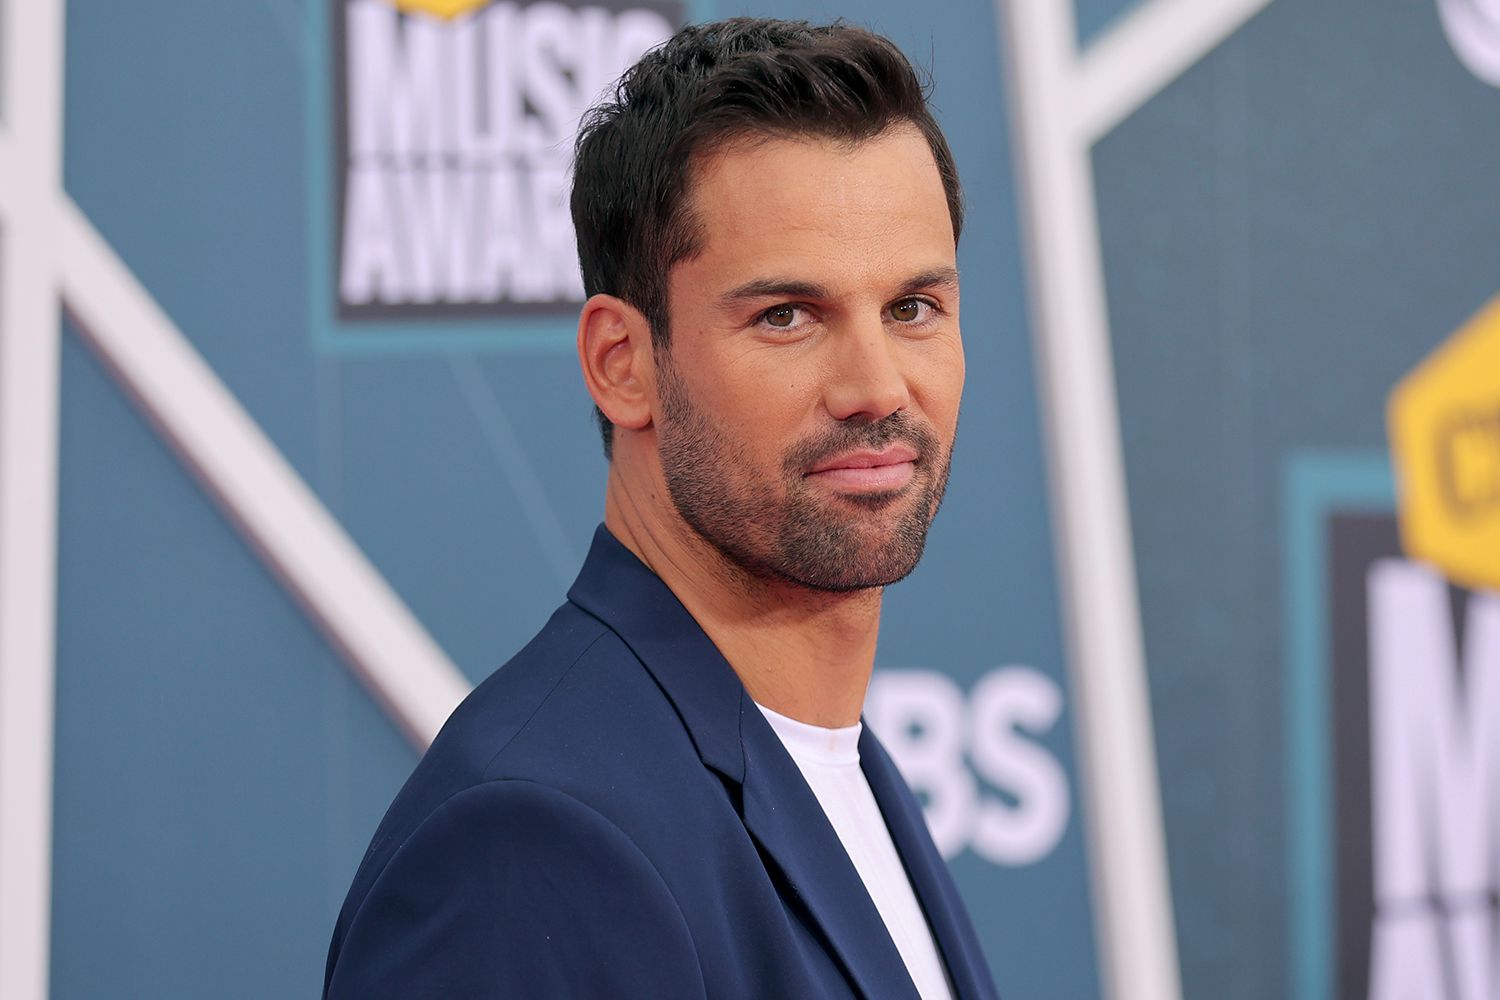 Eric Decker's Son Accidentally Posts Naked Photo of His Dad Showering | PEOPLE.com